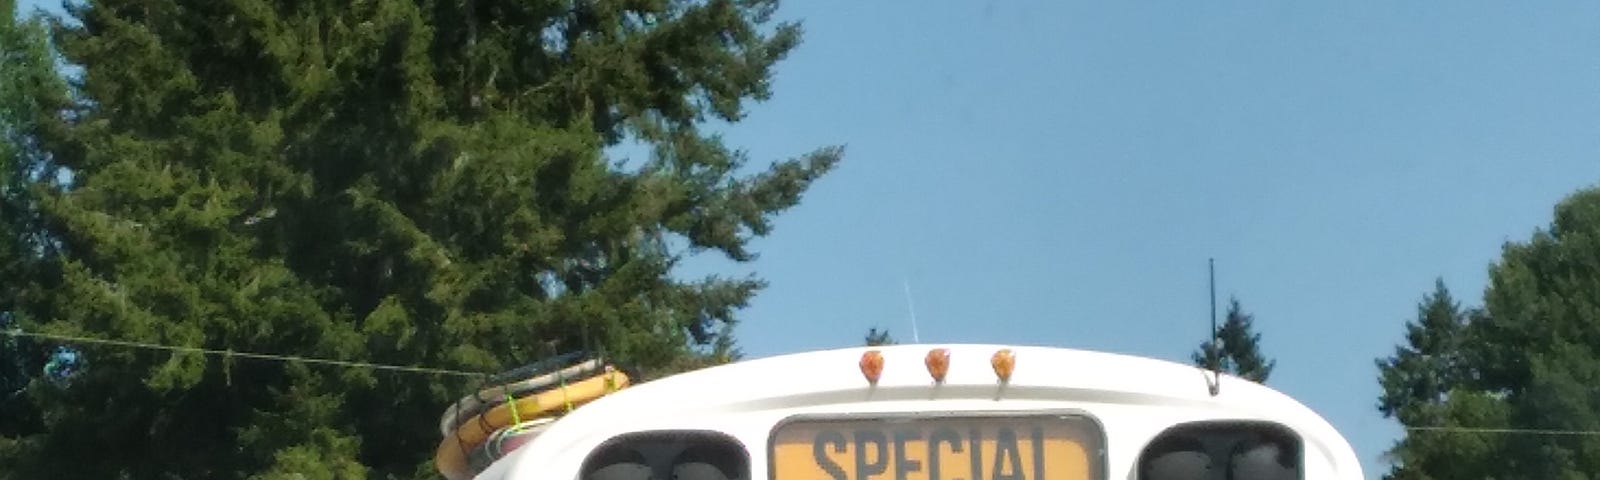 An old school bus that has the word special written above the from windshield